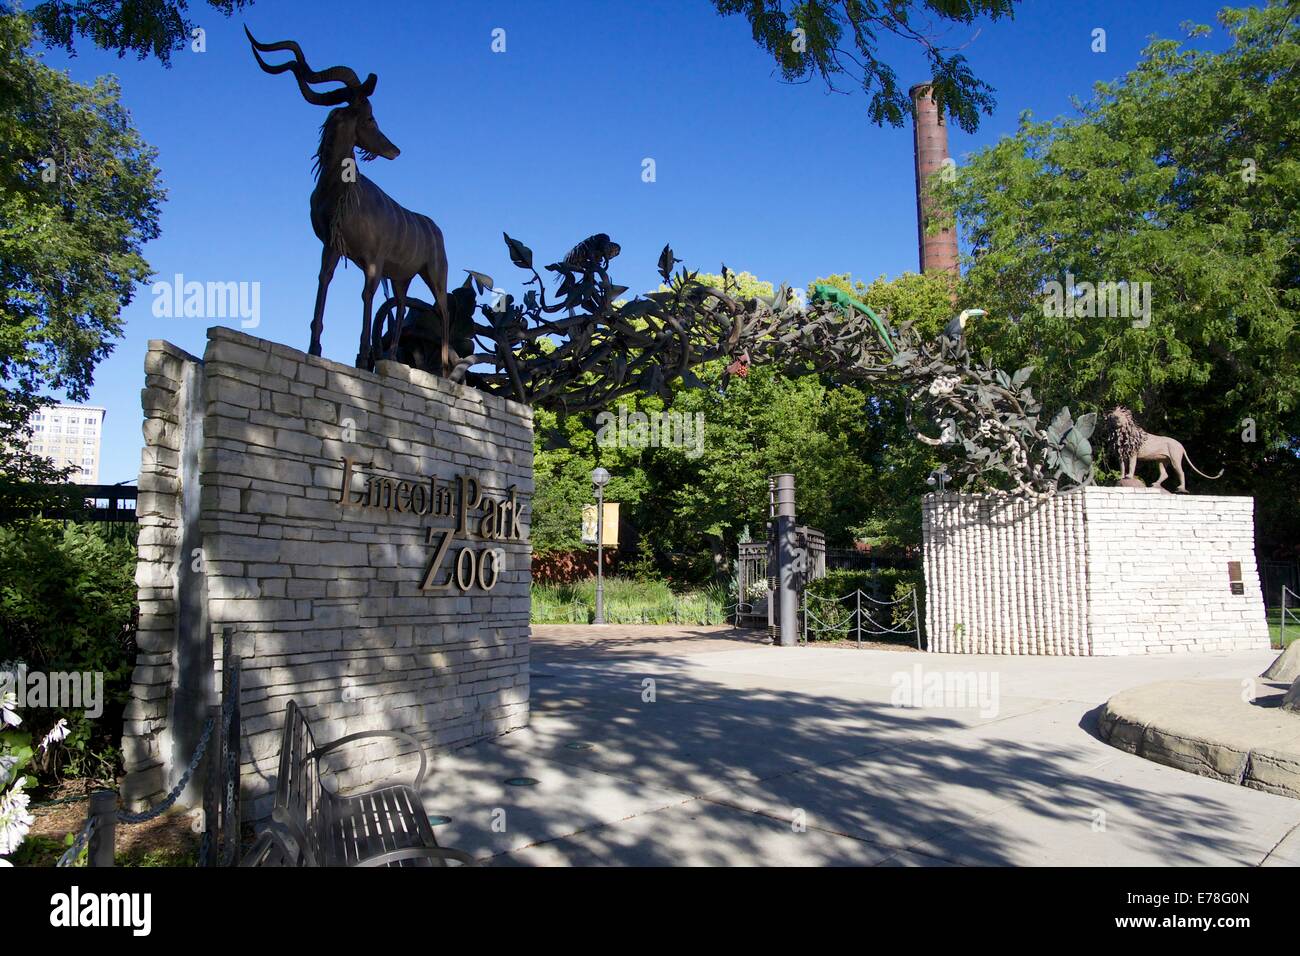 Lincoln Park Zoo east entrance. Chicago, Illinois. Stock Photo